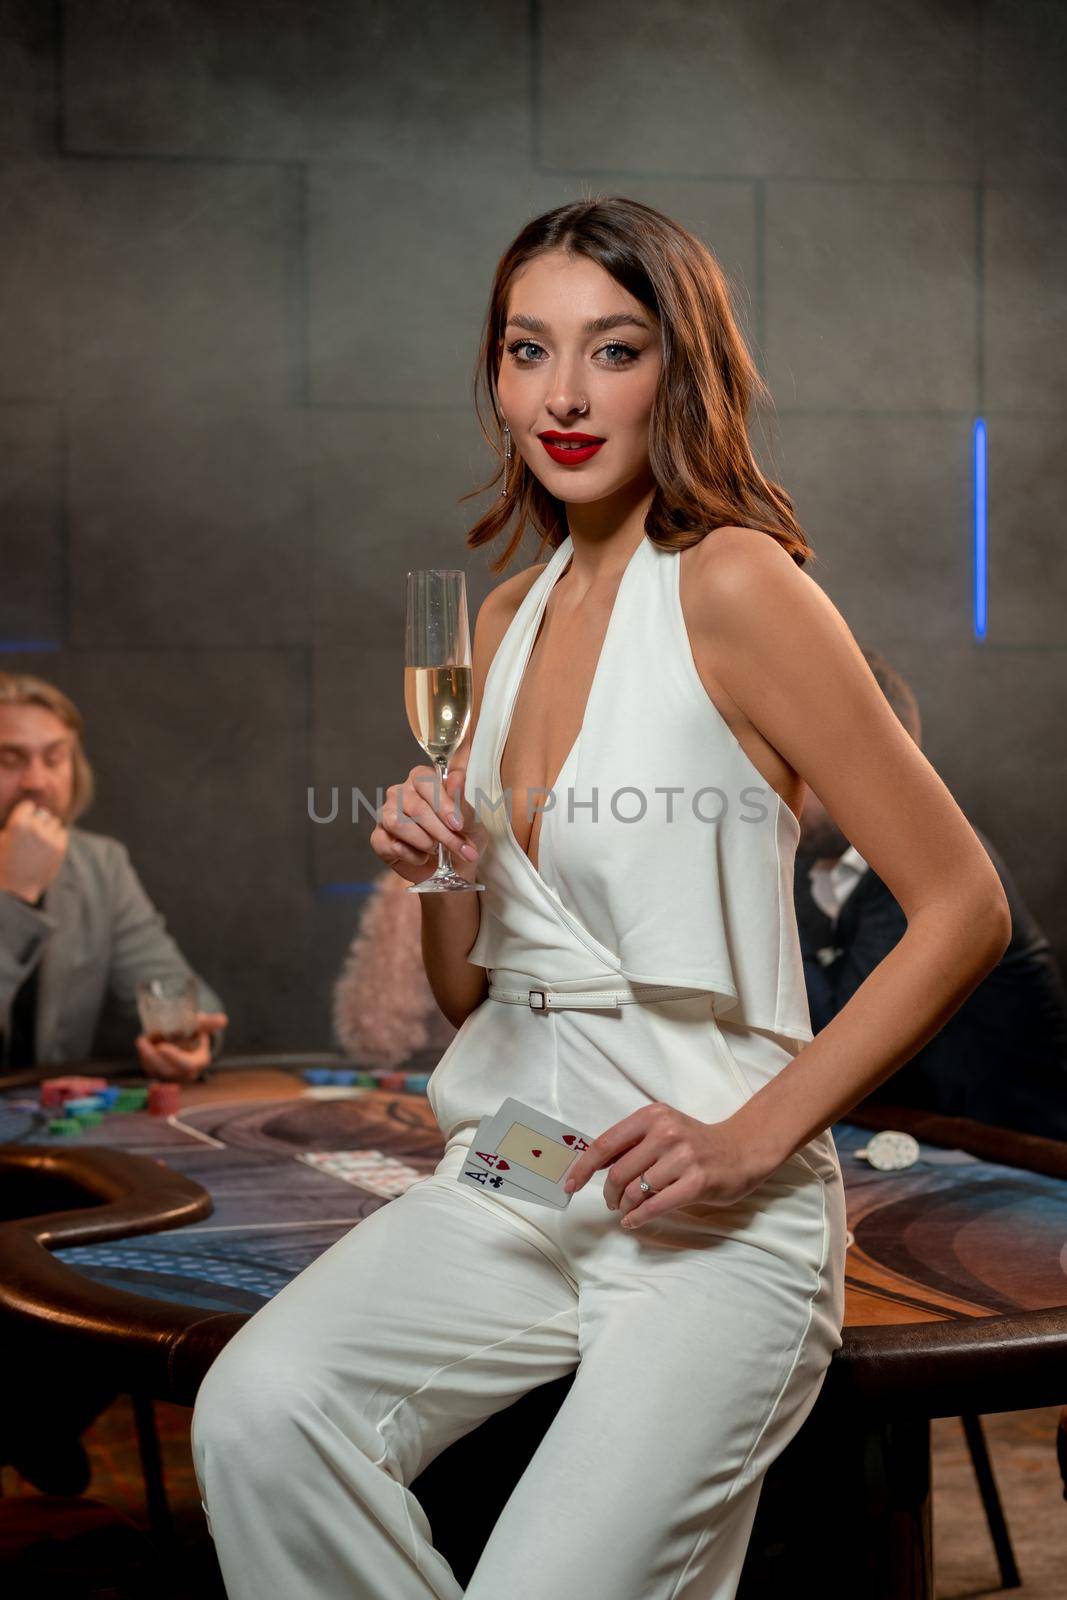 Portrait of successful young female poker player sitting on edge of gaming table, holding winning pair of aces and raising glass of champagne